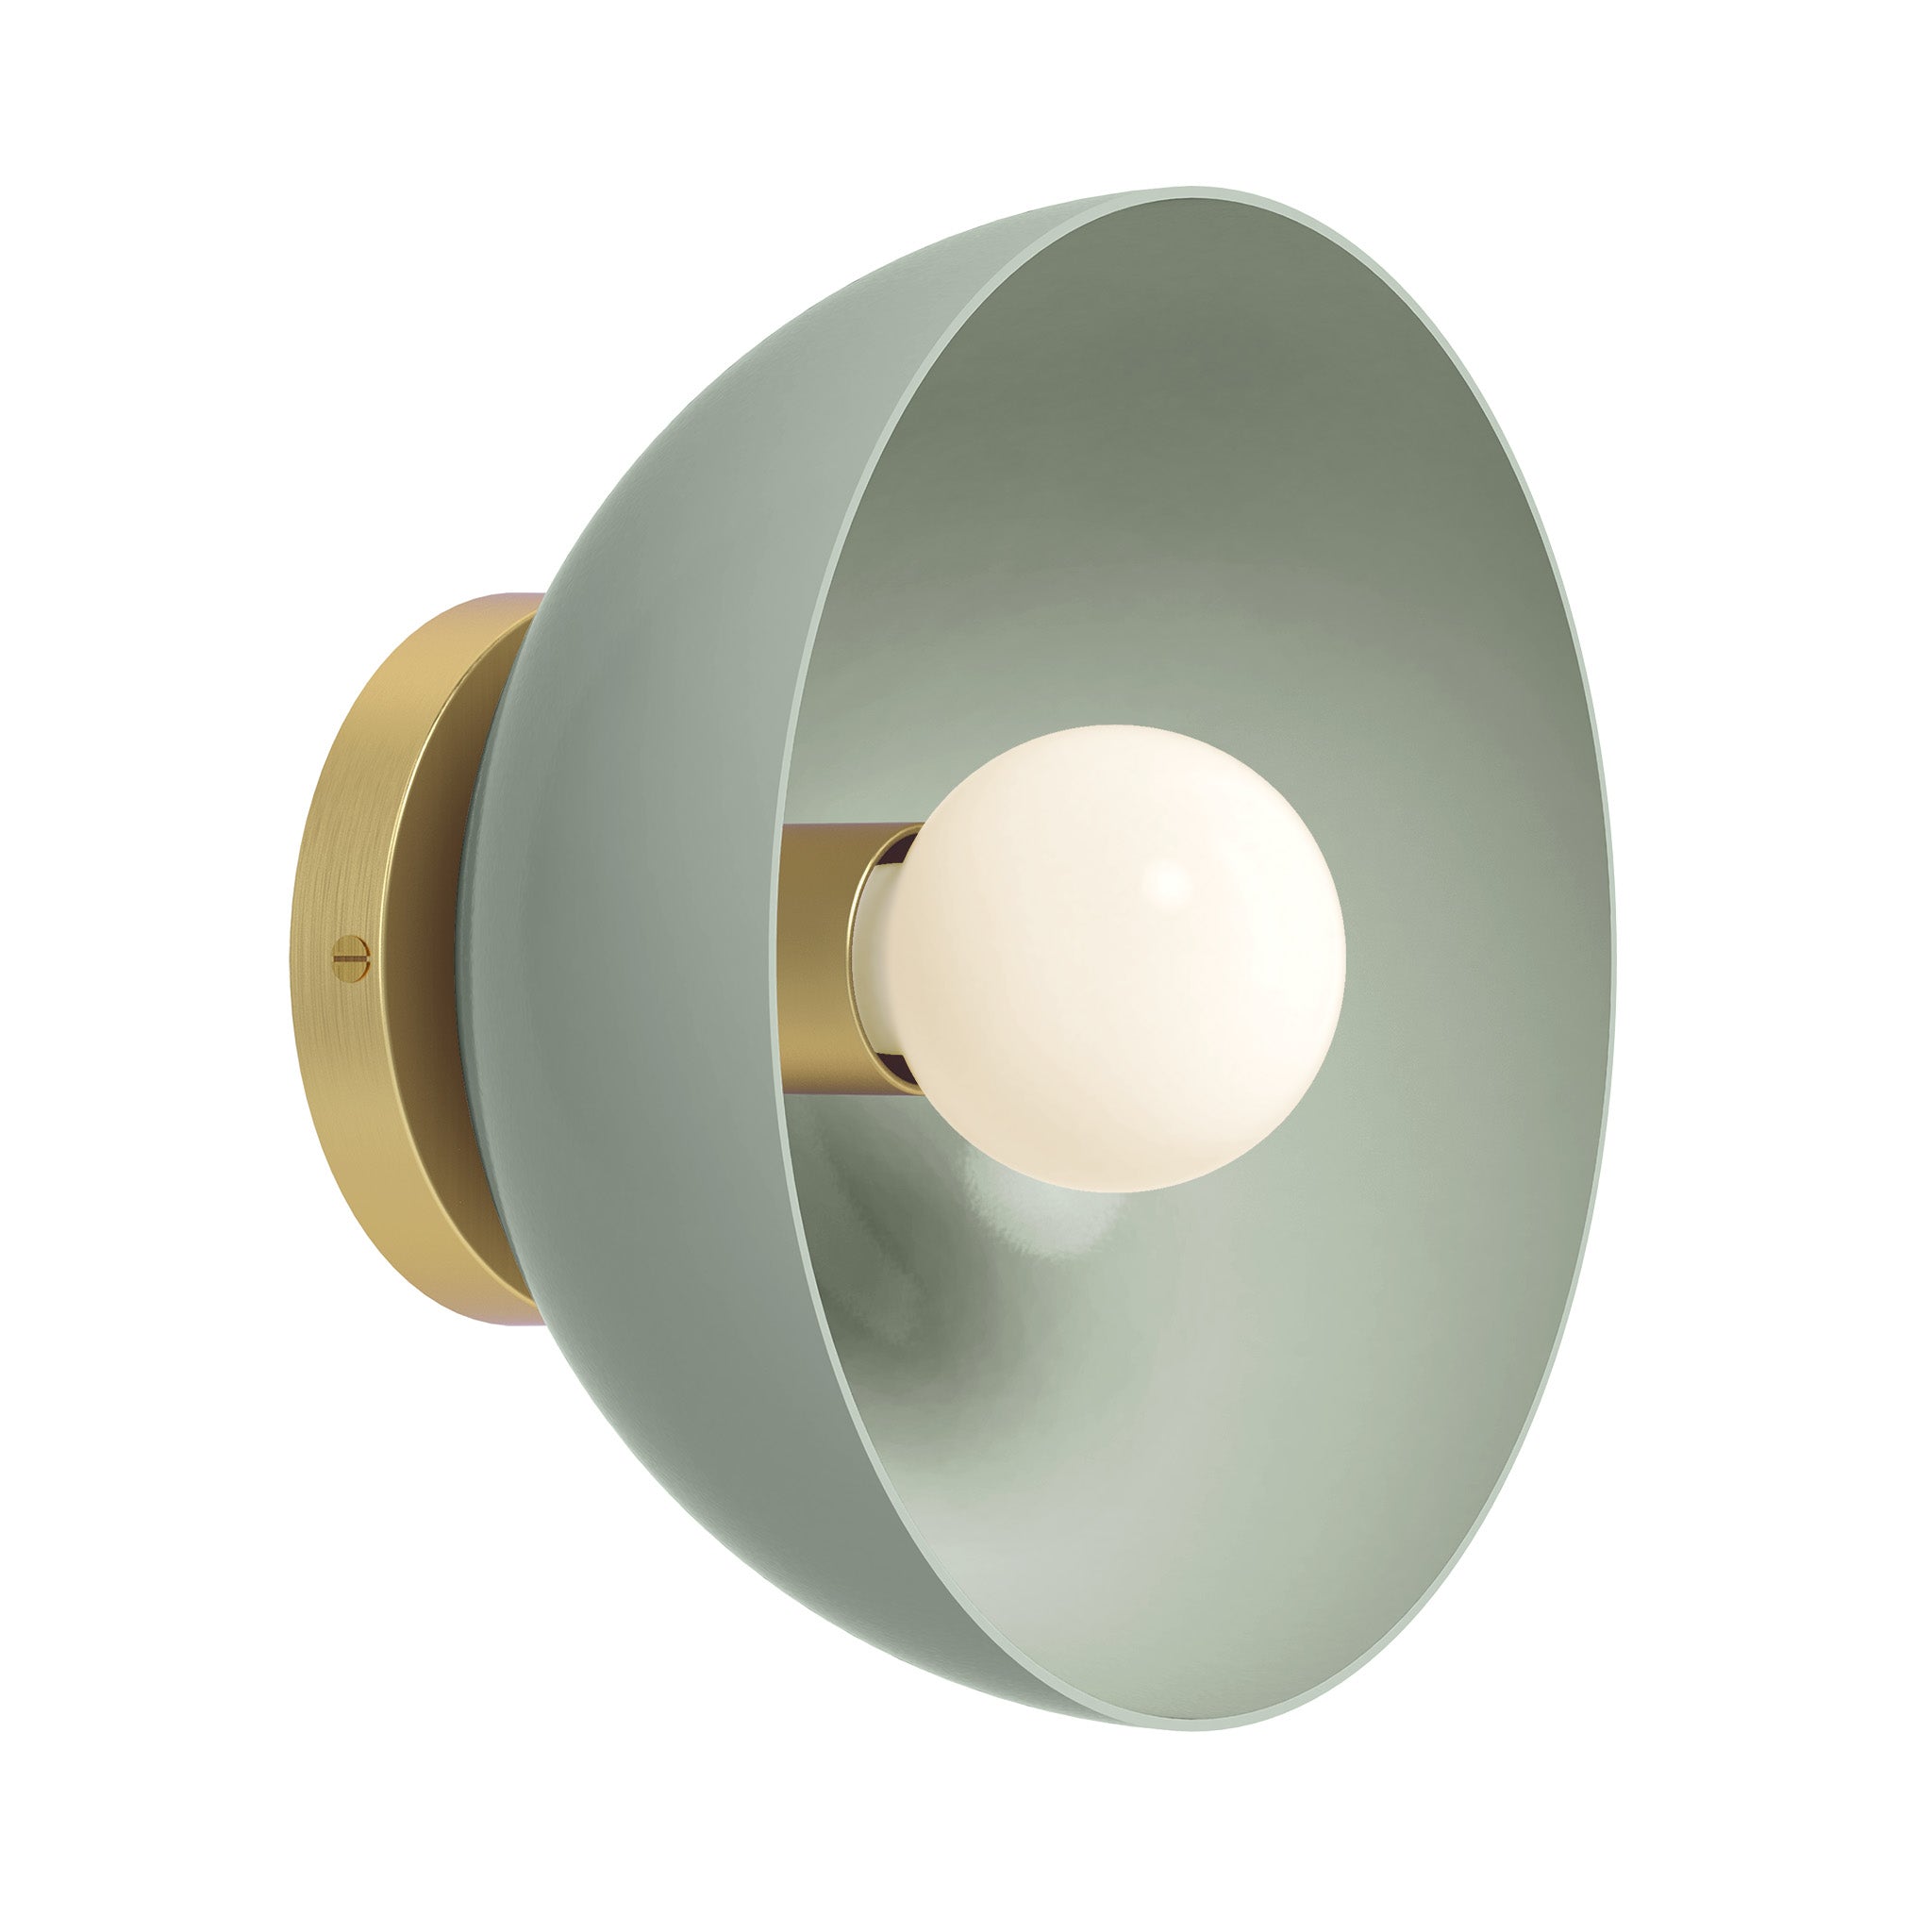 Brass and spa color hemi dome sconce 10" Dutton Brown lighting